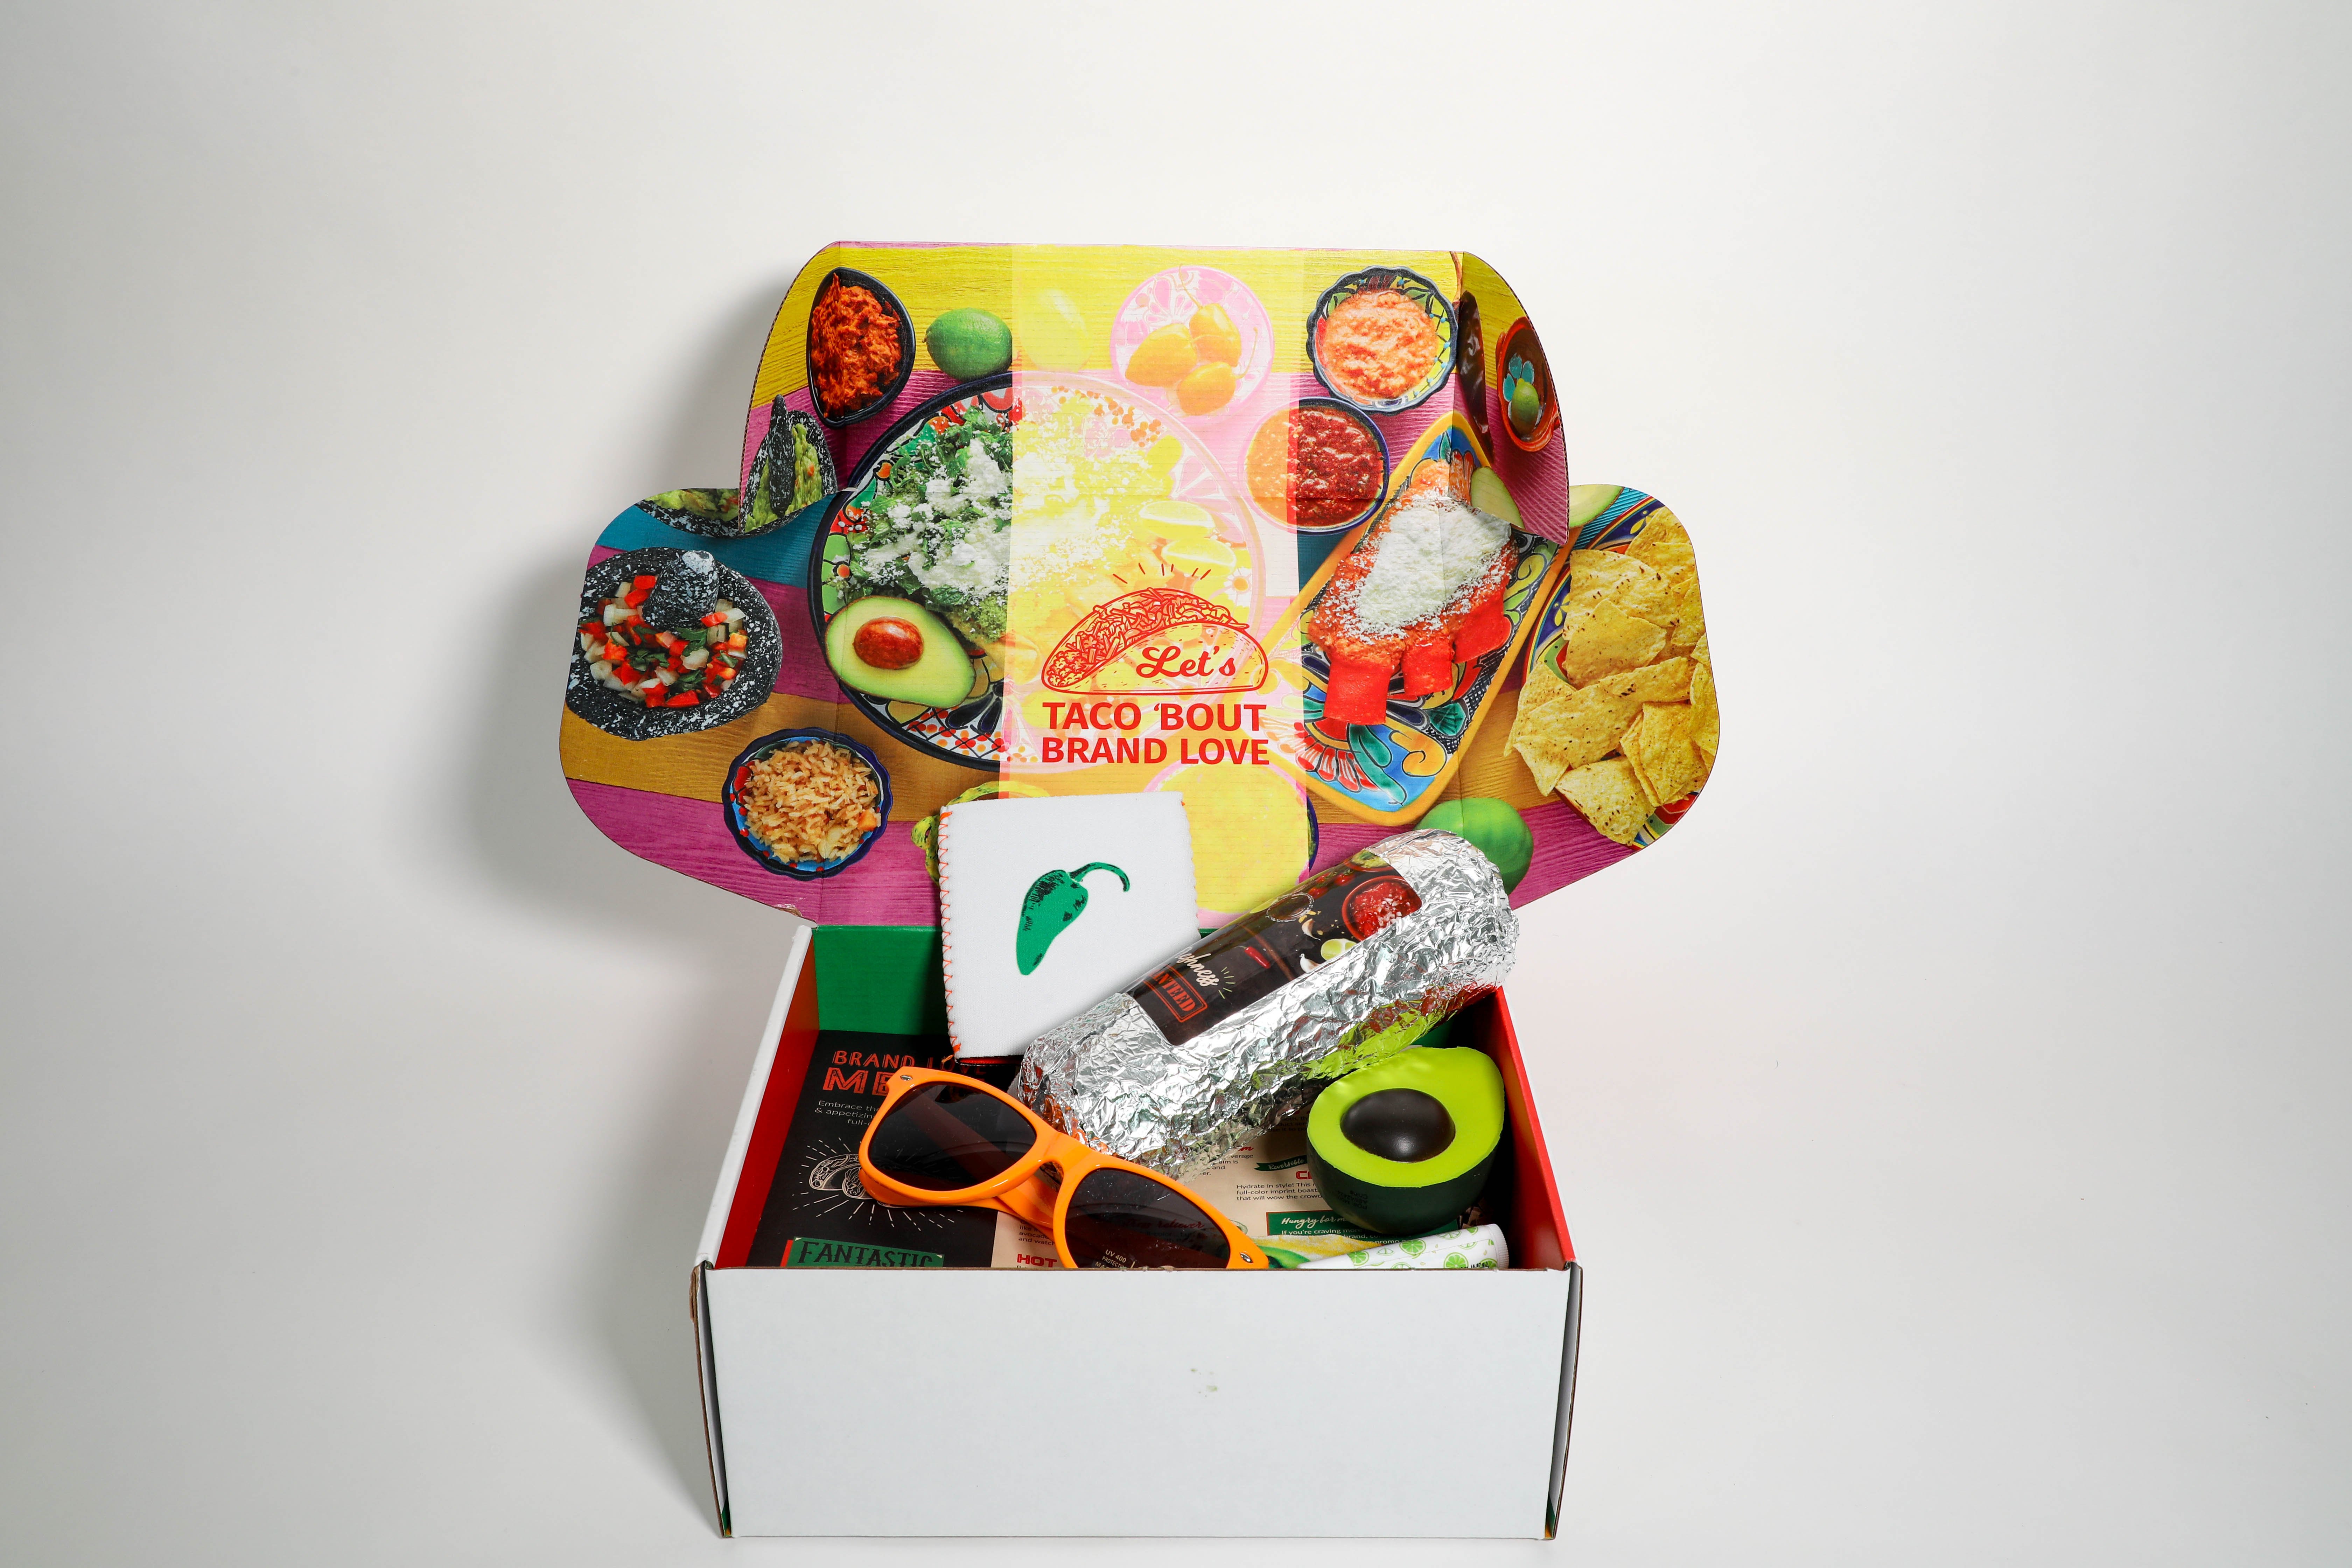 Let's Taco 'Bout Brand Love Box